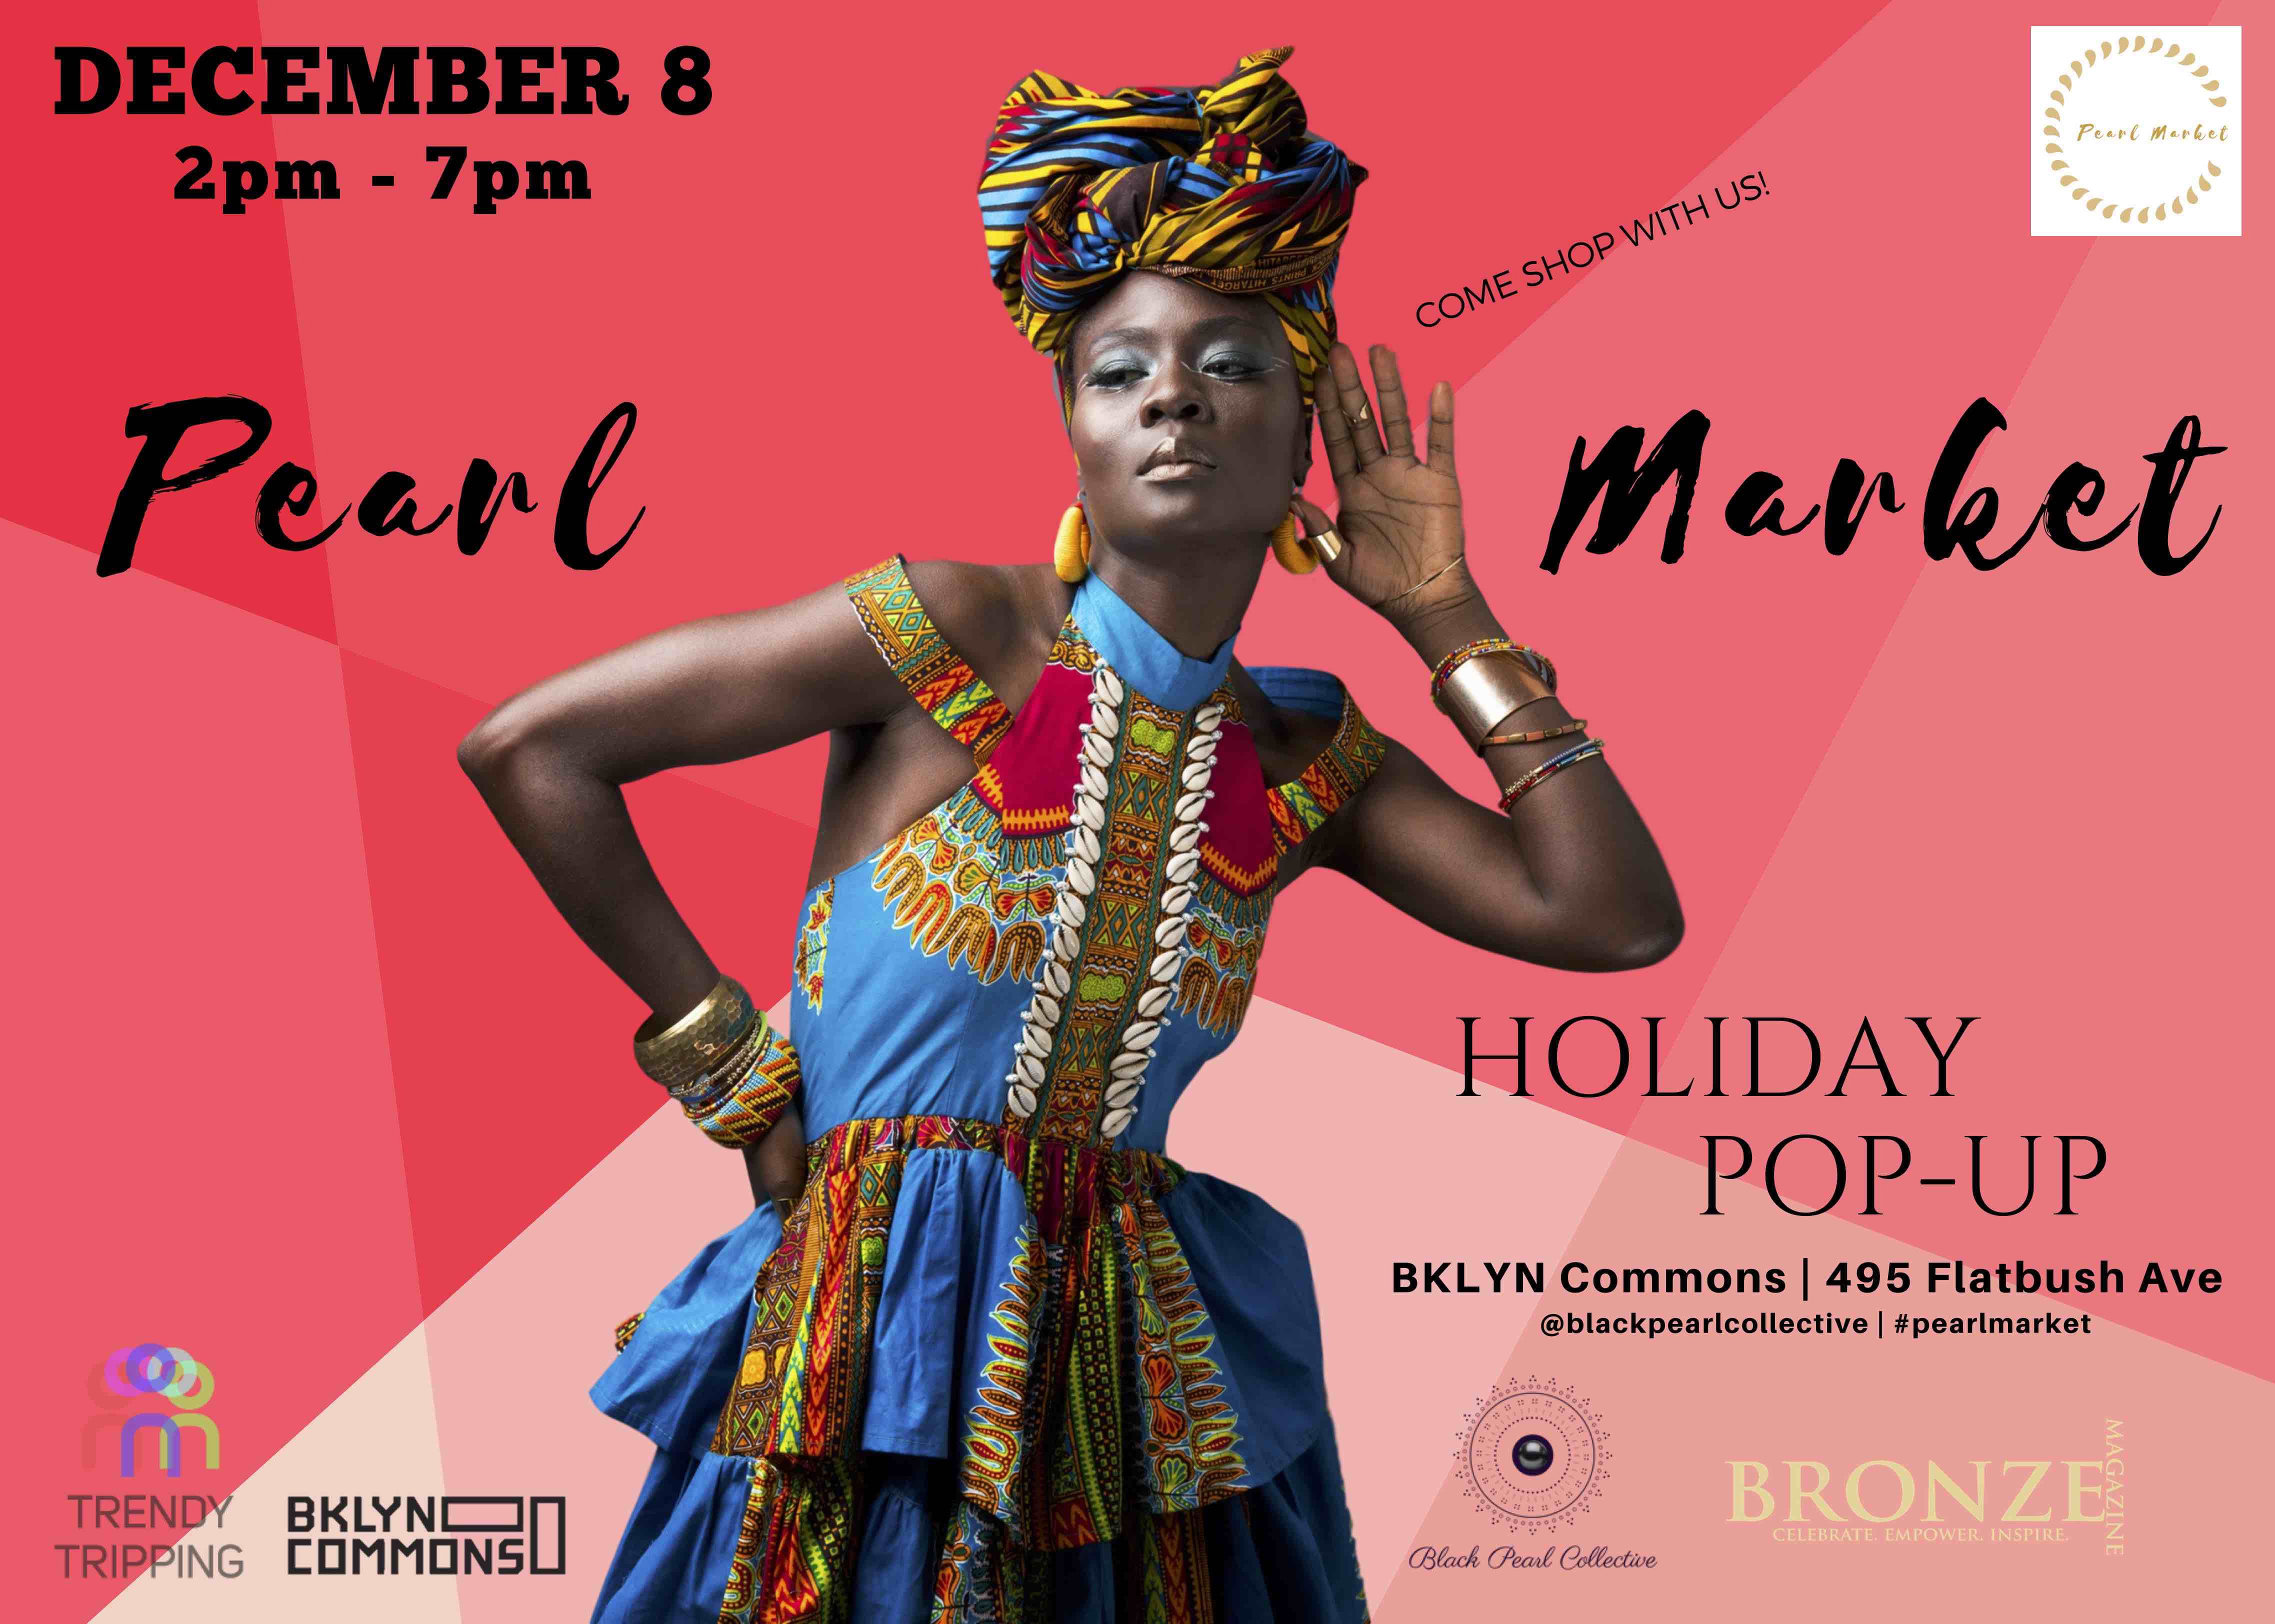 Holiday Pop-Up